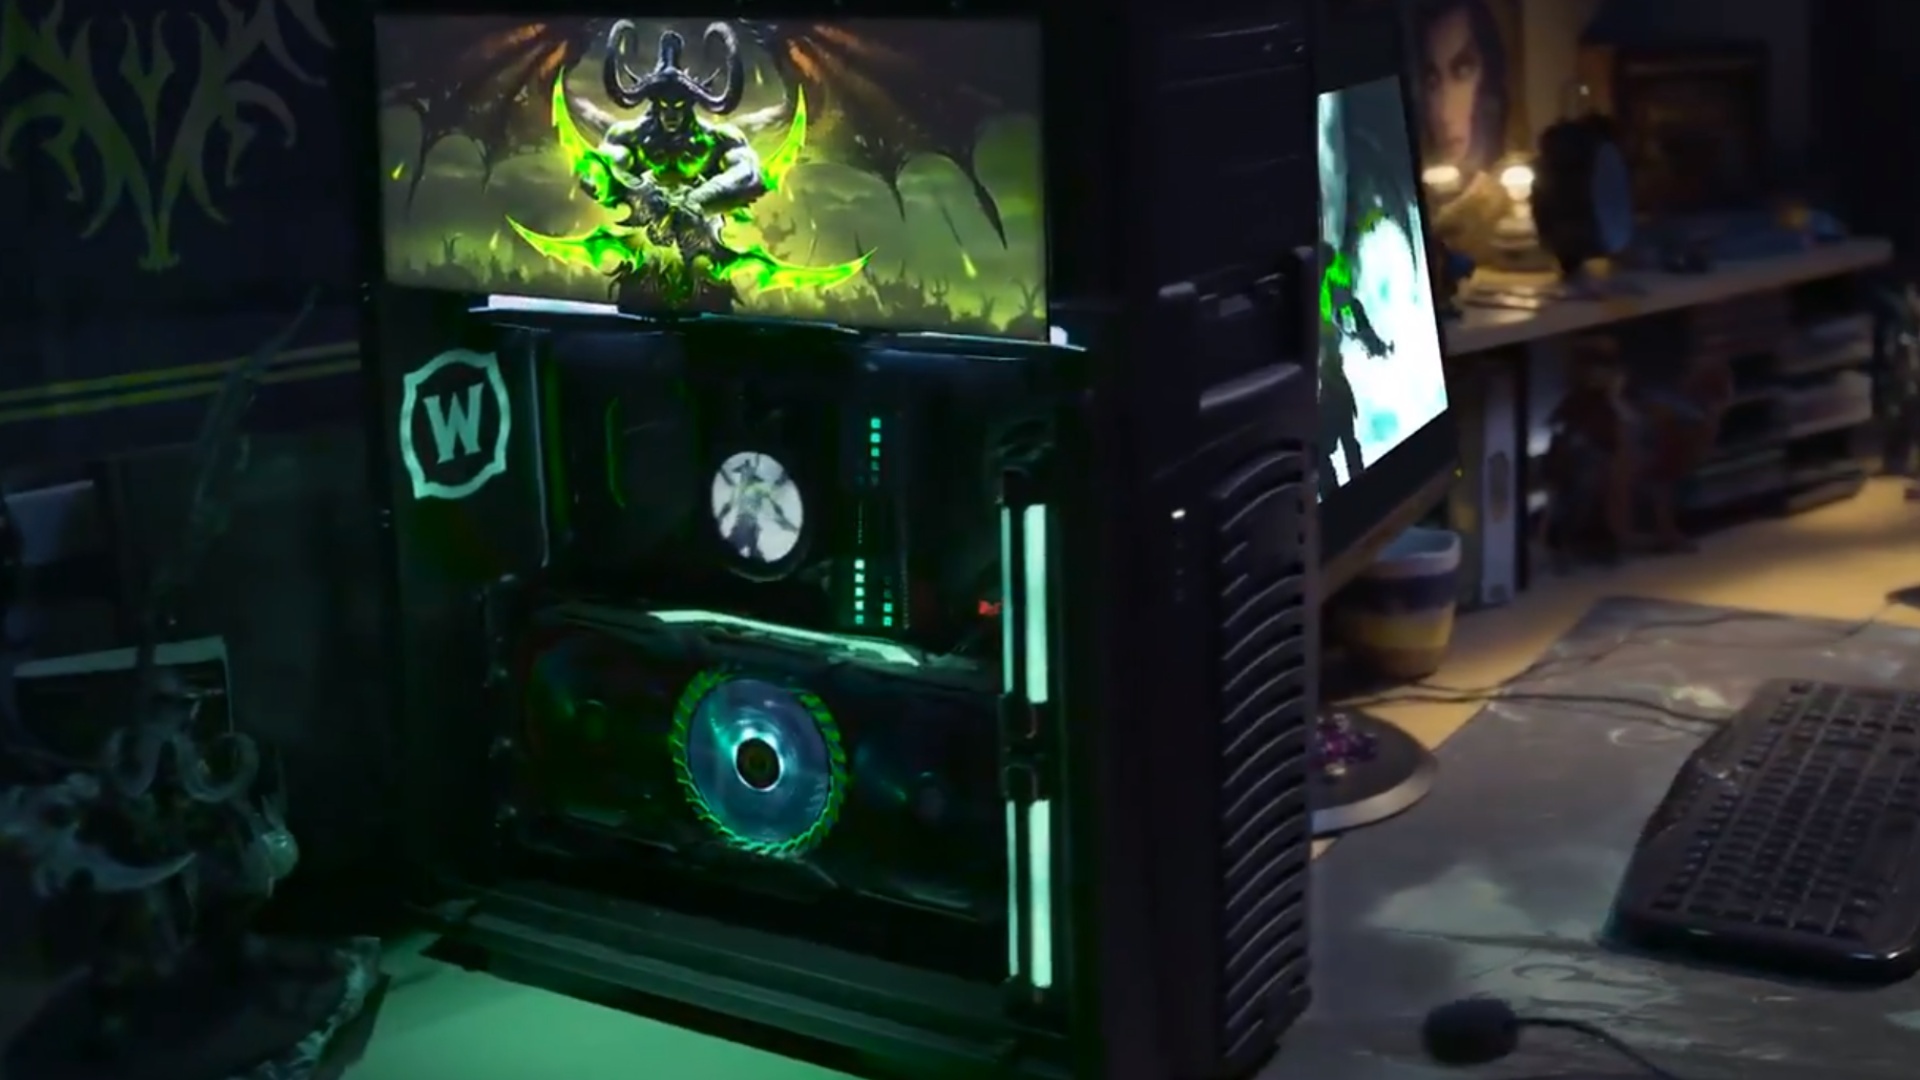 afgår Benign nærme sig Blizzard's Custom Throwback PC Sweepstakes for Burning Crusade Classic  Launch - Wowhead News